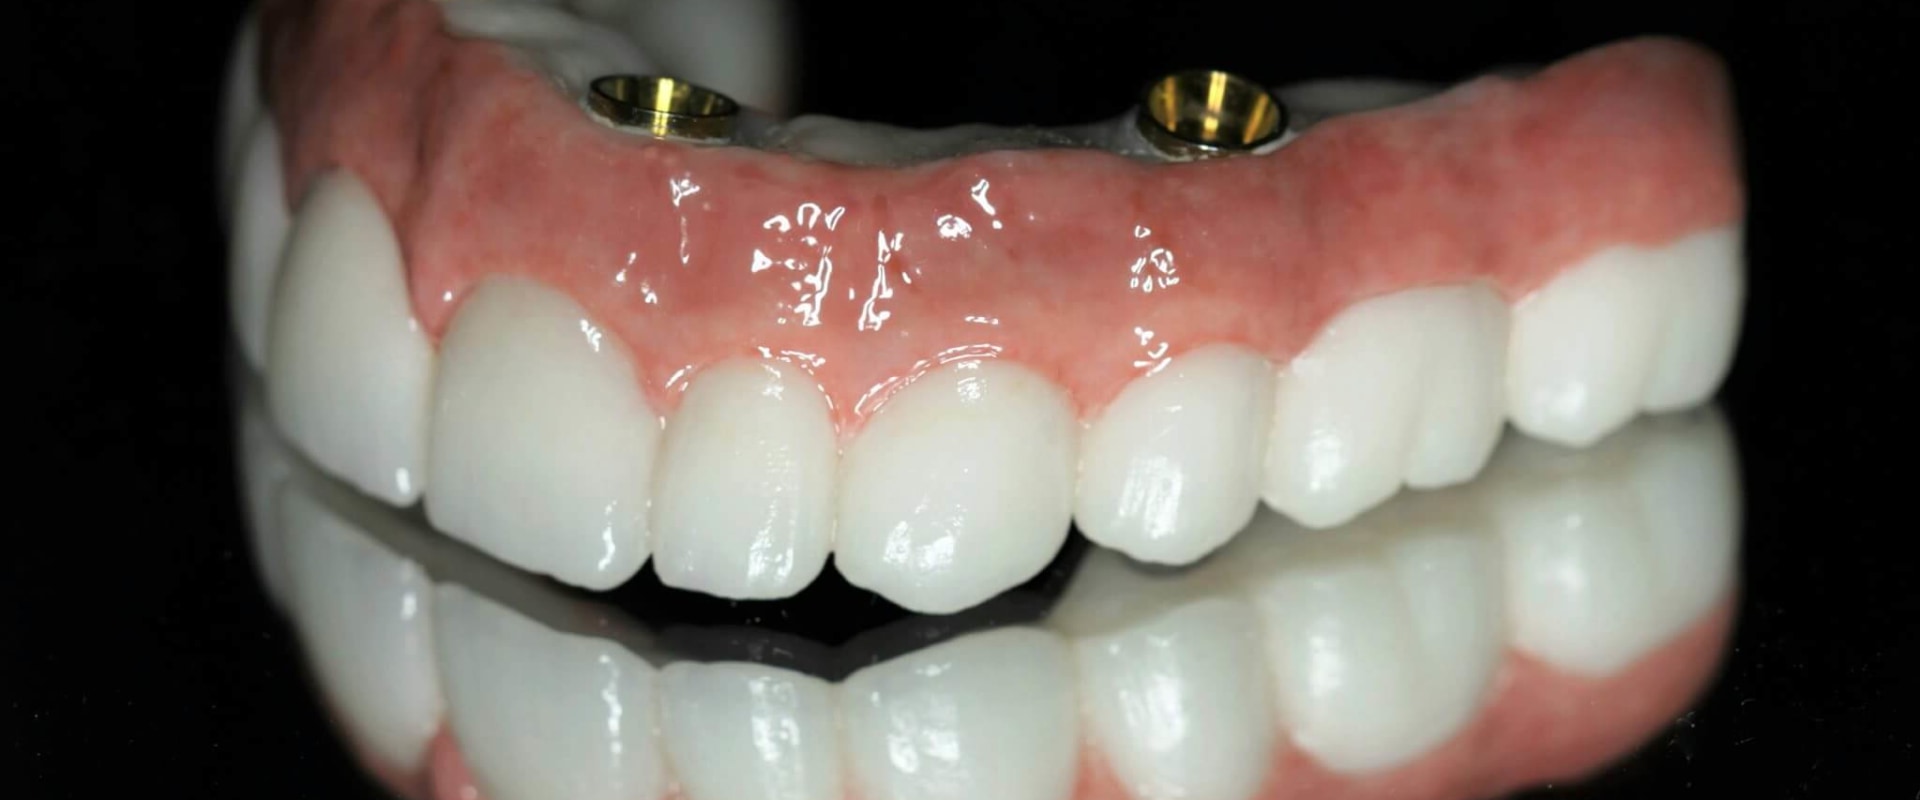 Which is a leading cause of dental implant failure?